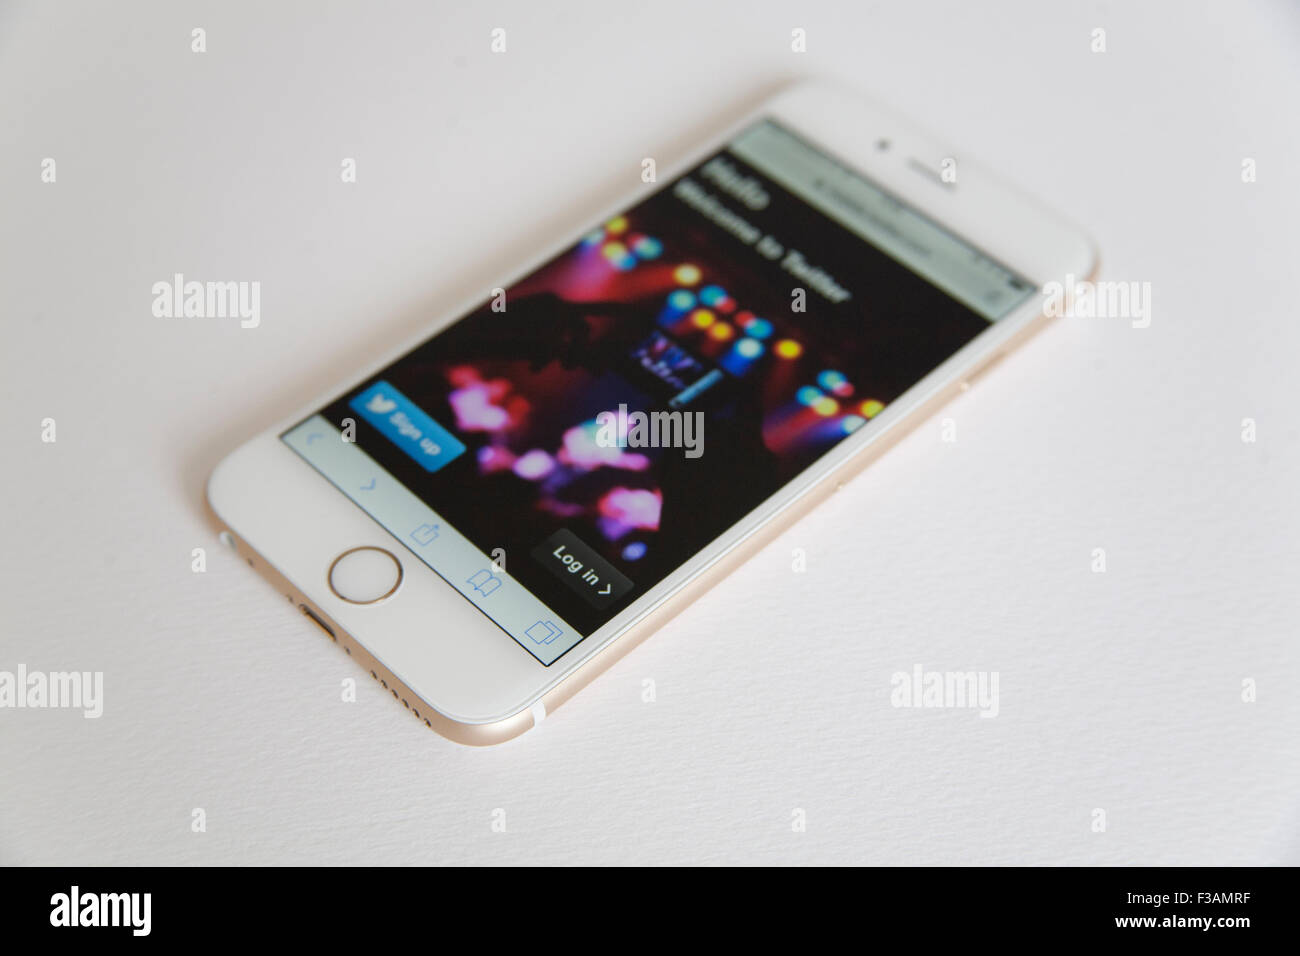 Gold and white Apple iPhone 6 with a Twitter log in page against a white background Stock Photo